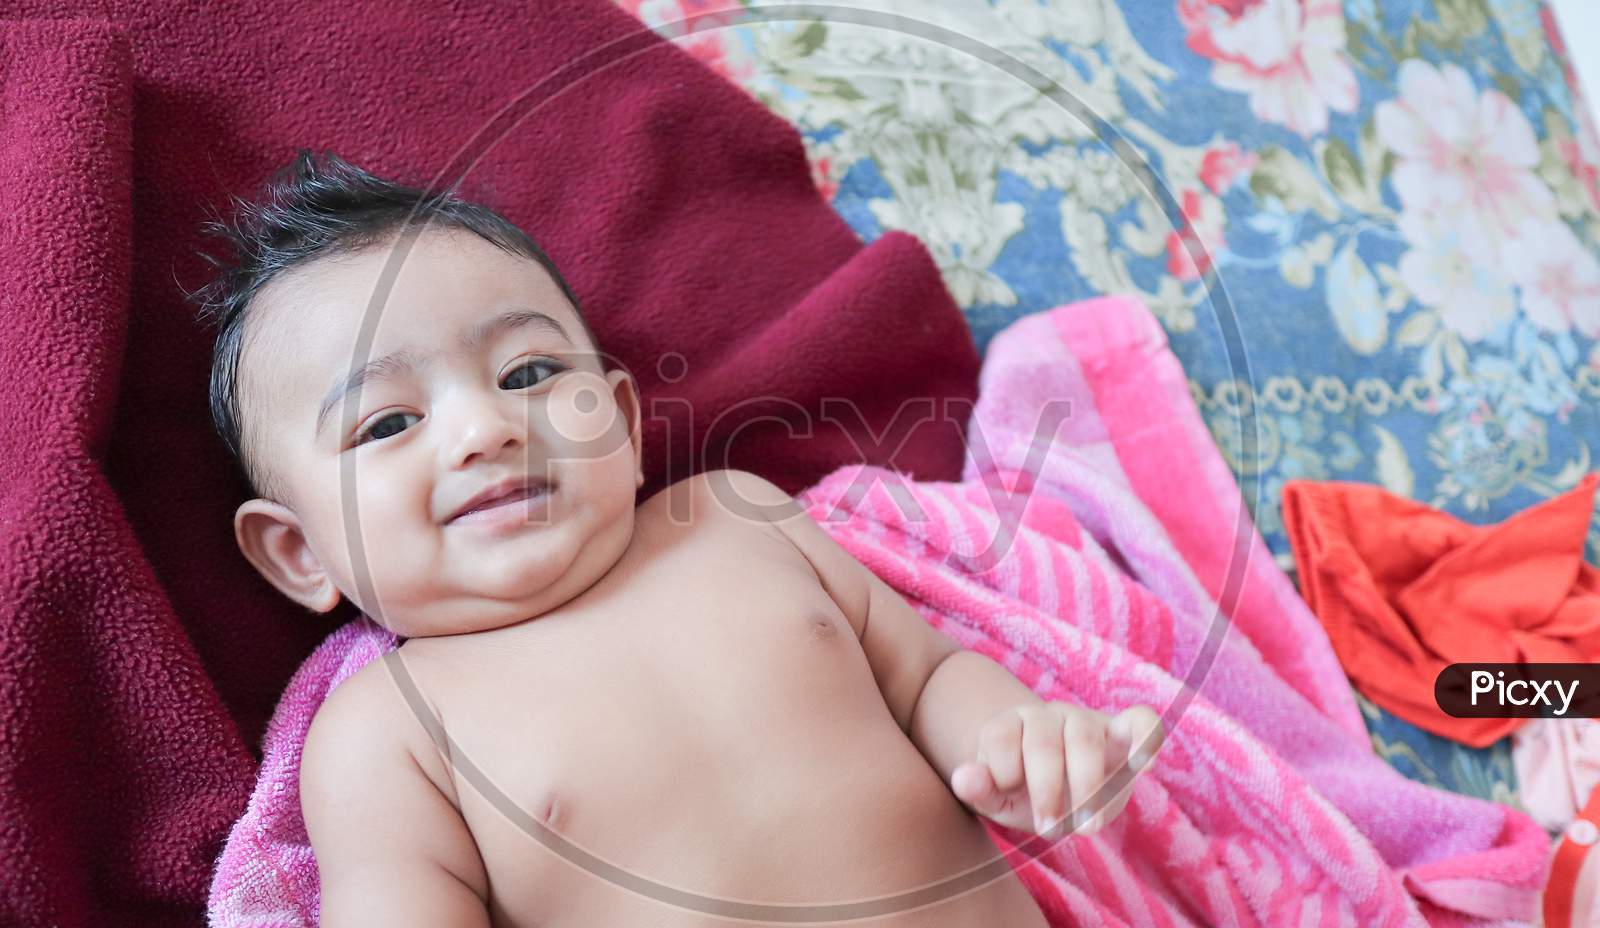 An Infant Toddler Baby Boy Smiling On A Magenta Towel